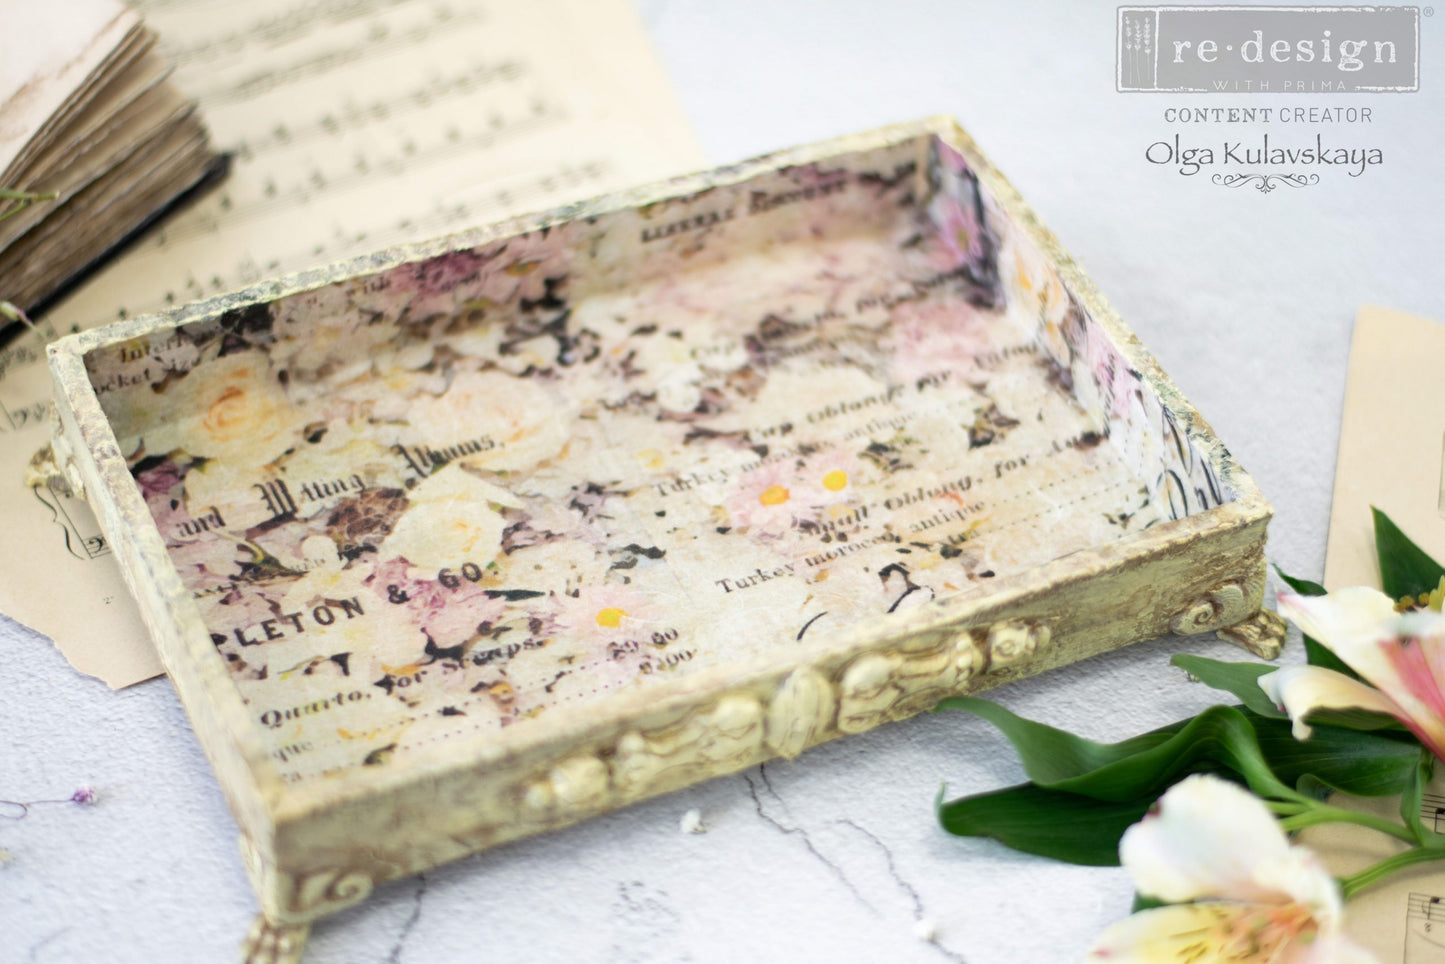 Floral & Dream - Redesign découpage Redesign with Prima